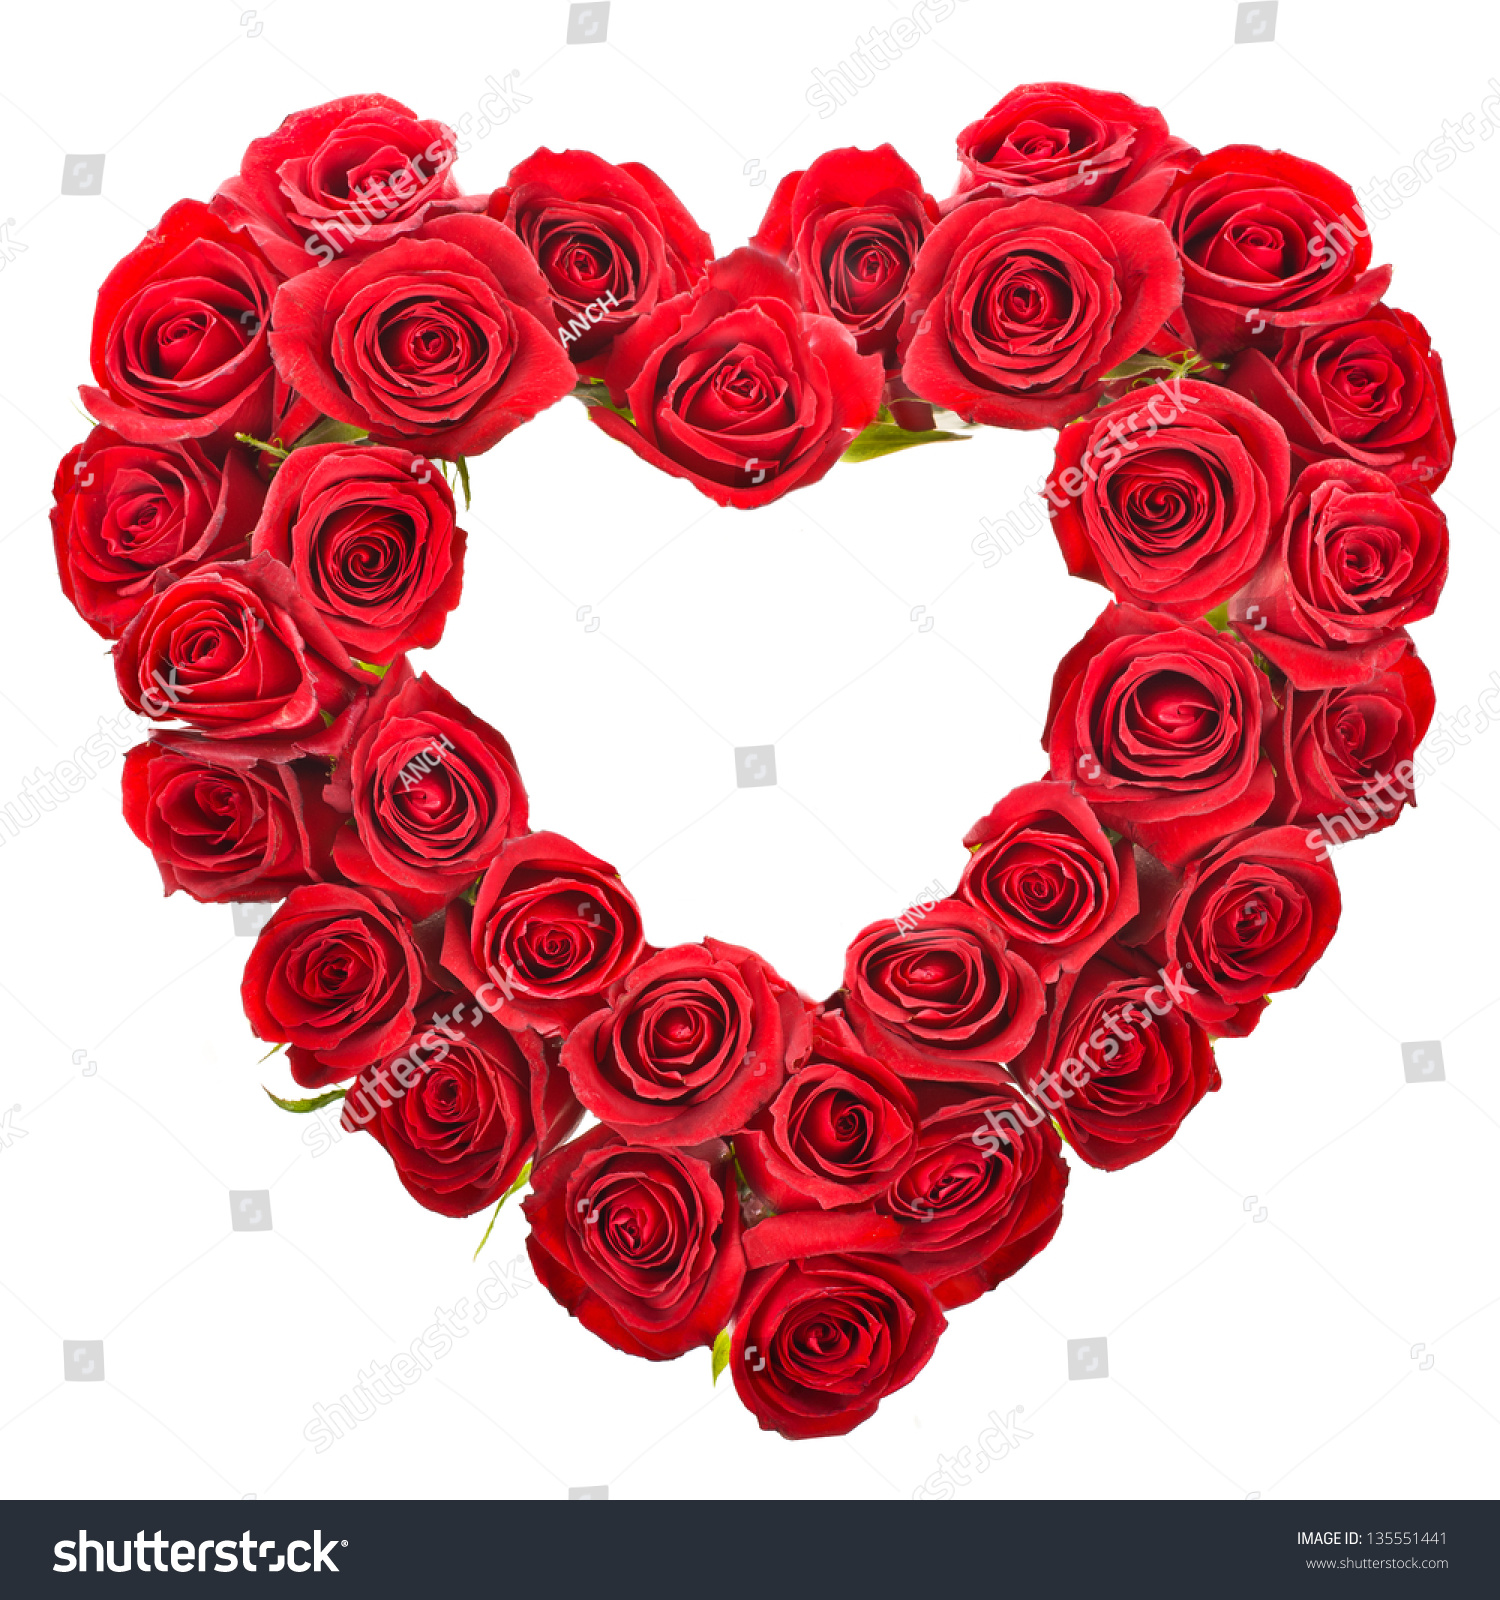 Heart Shaped Bouquet Red Roses Isolated Stock Photo 135551441 ...